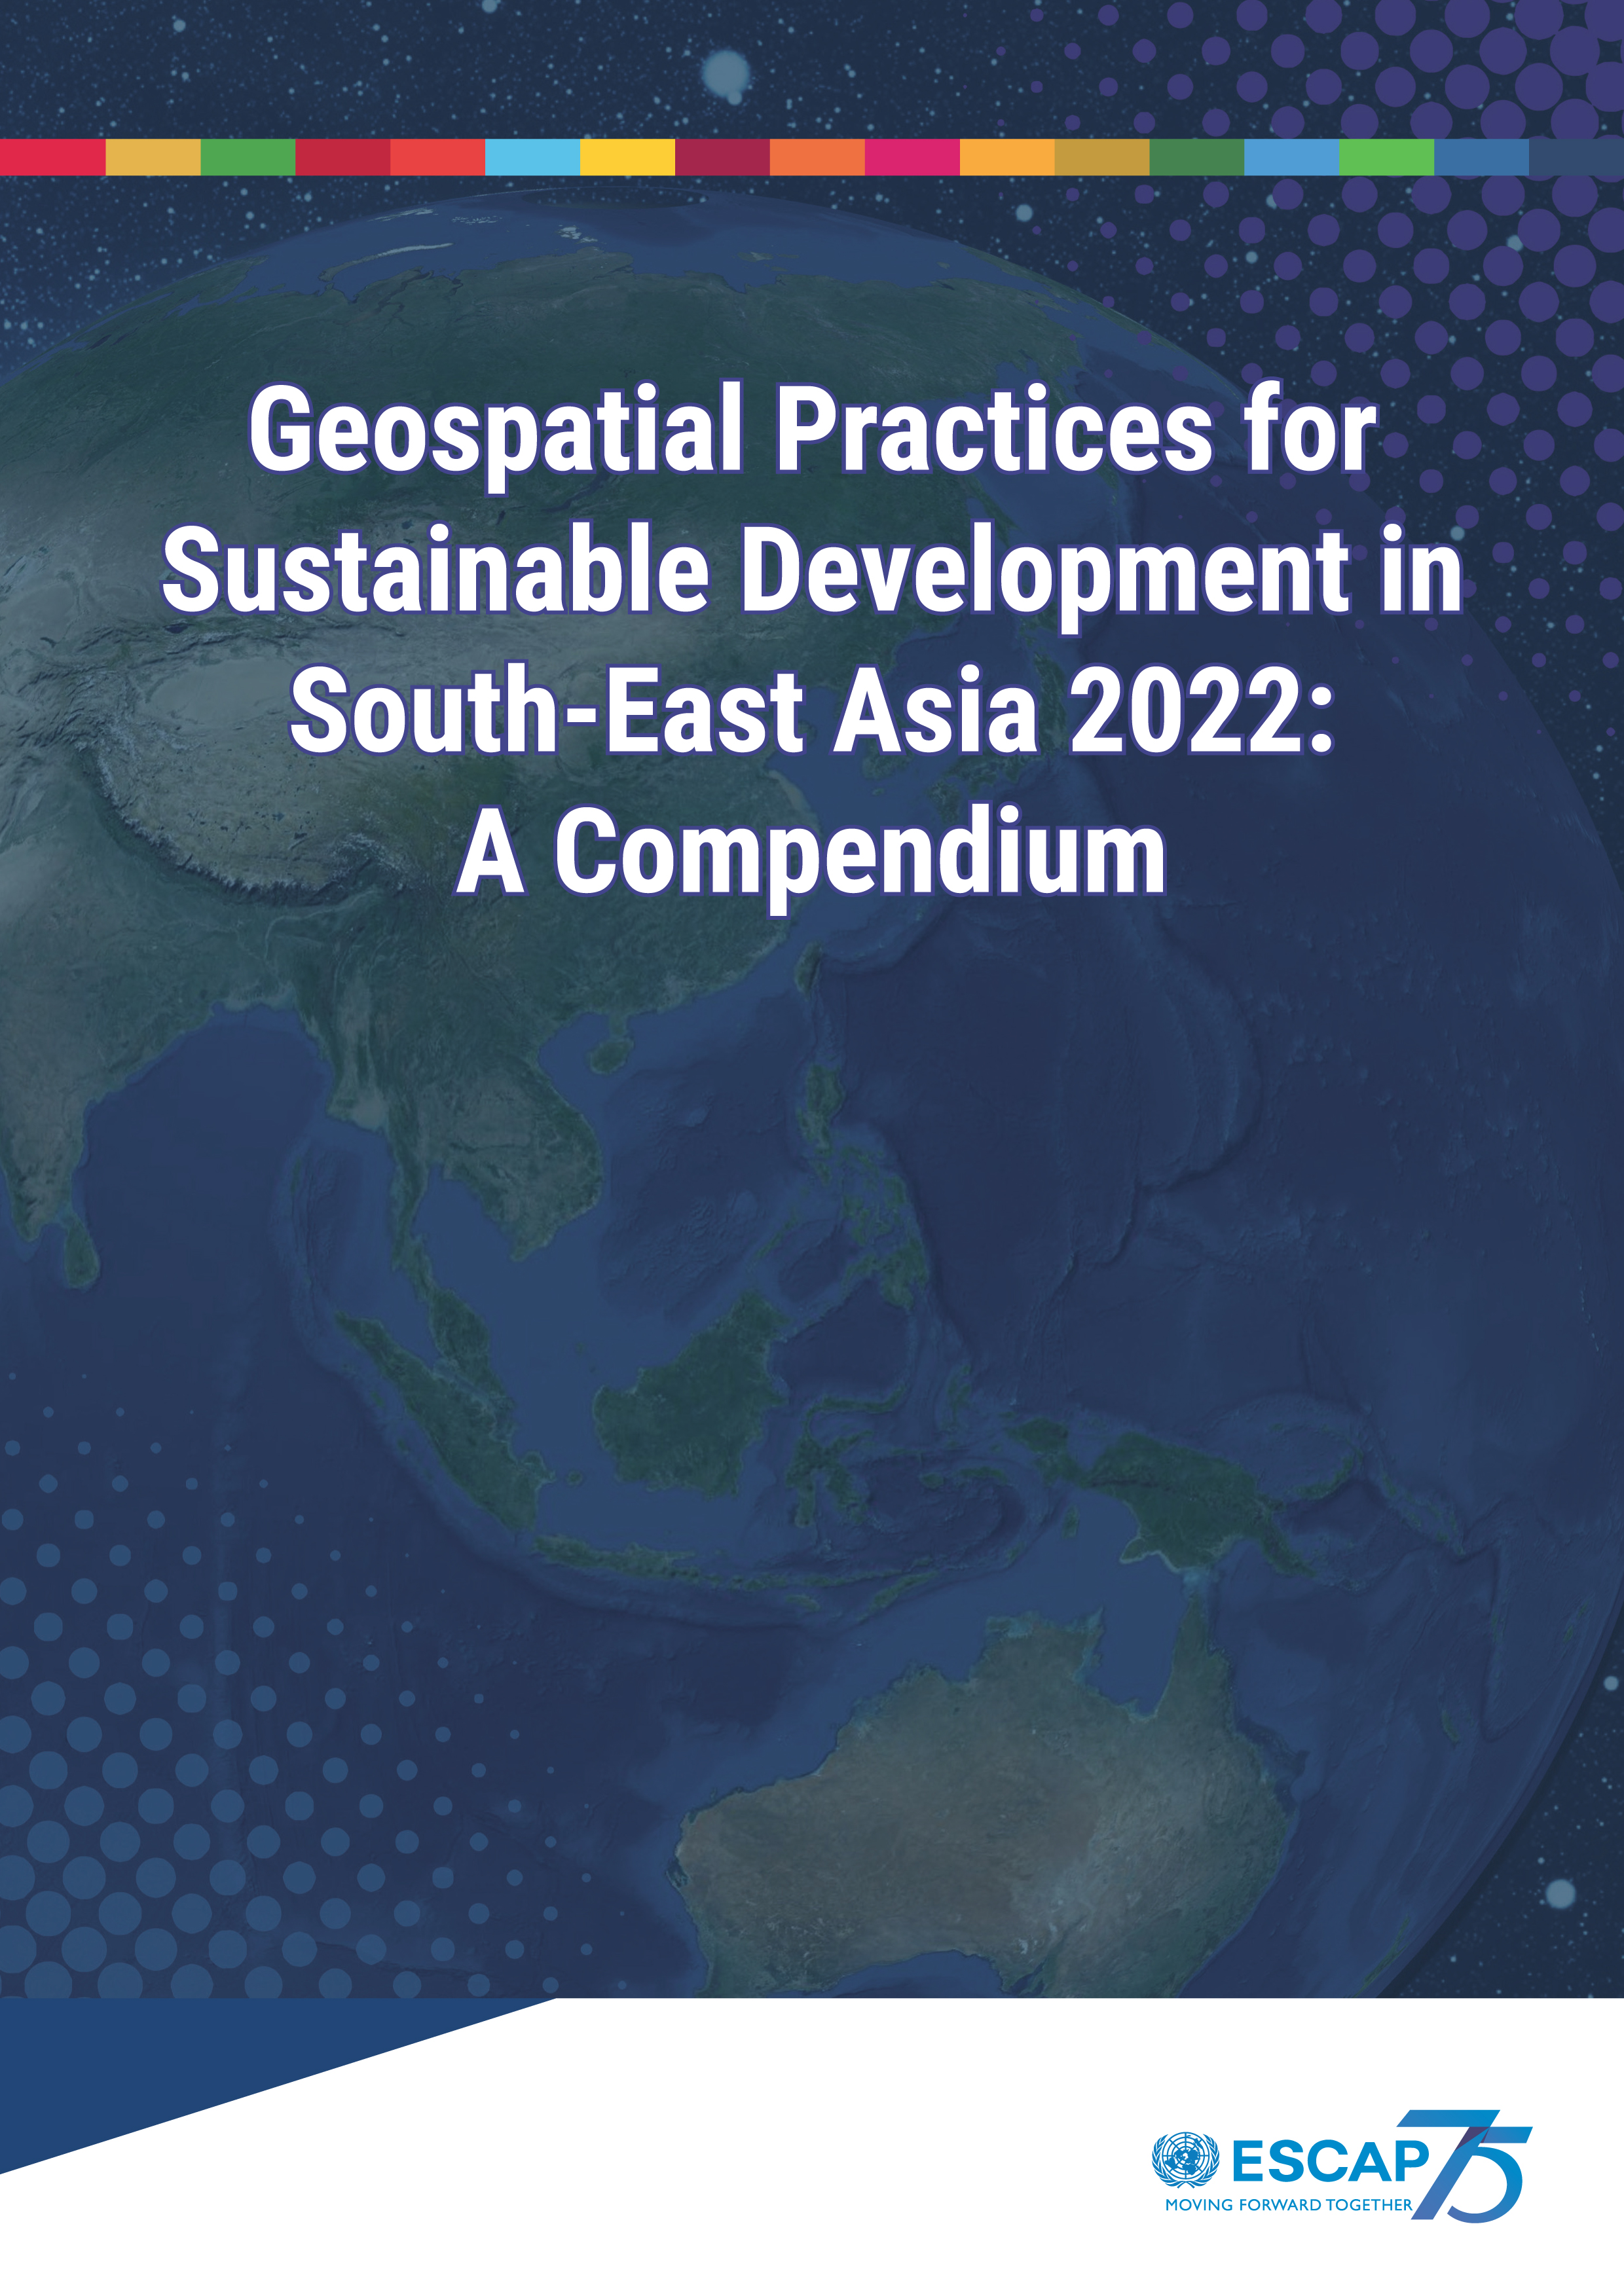 image of Geospatial Practices for Sustainable Development in South-East Asia 2022: A Compendium